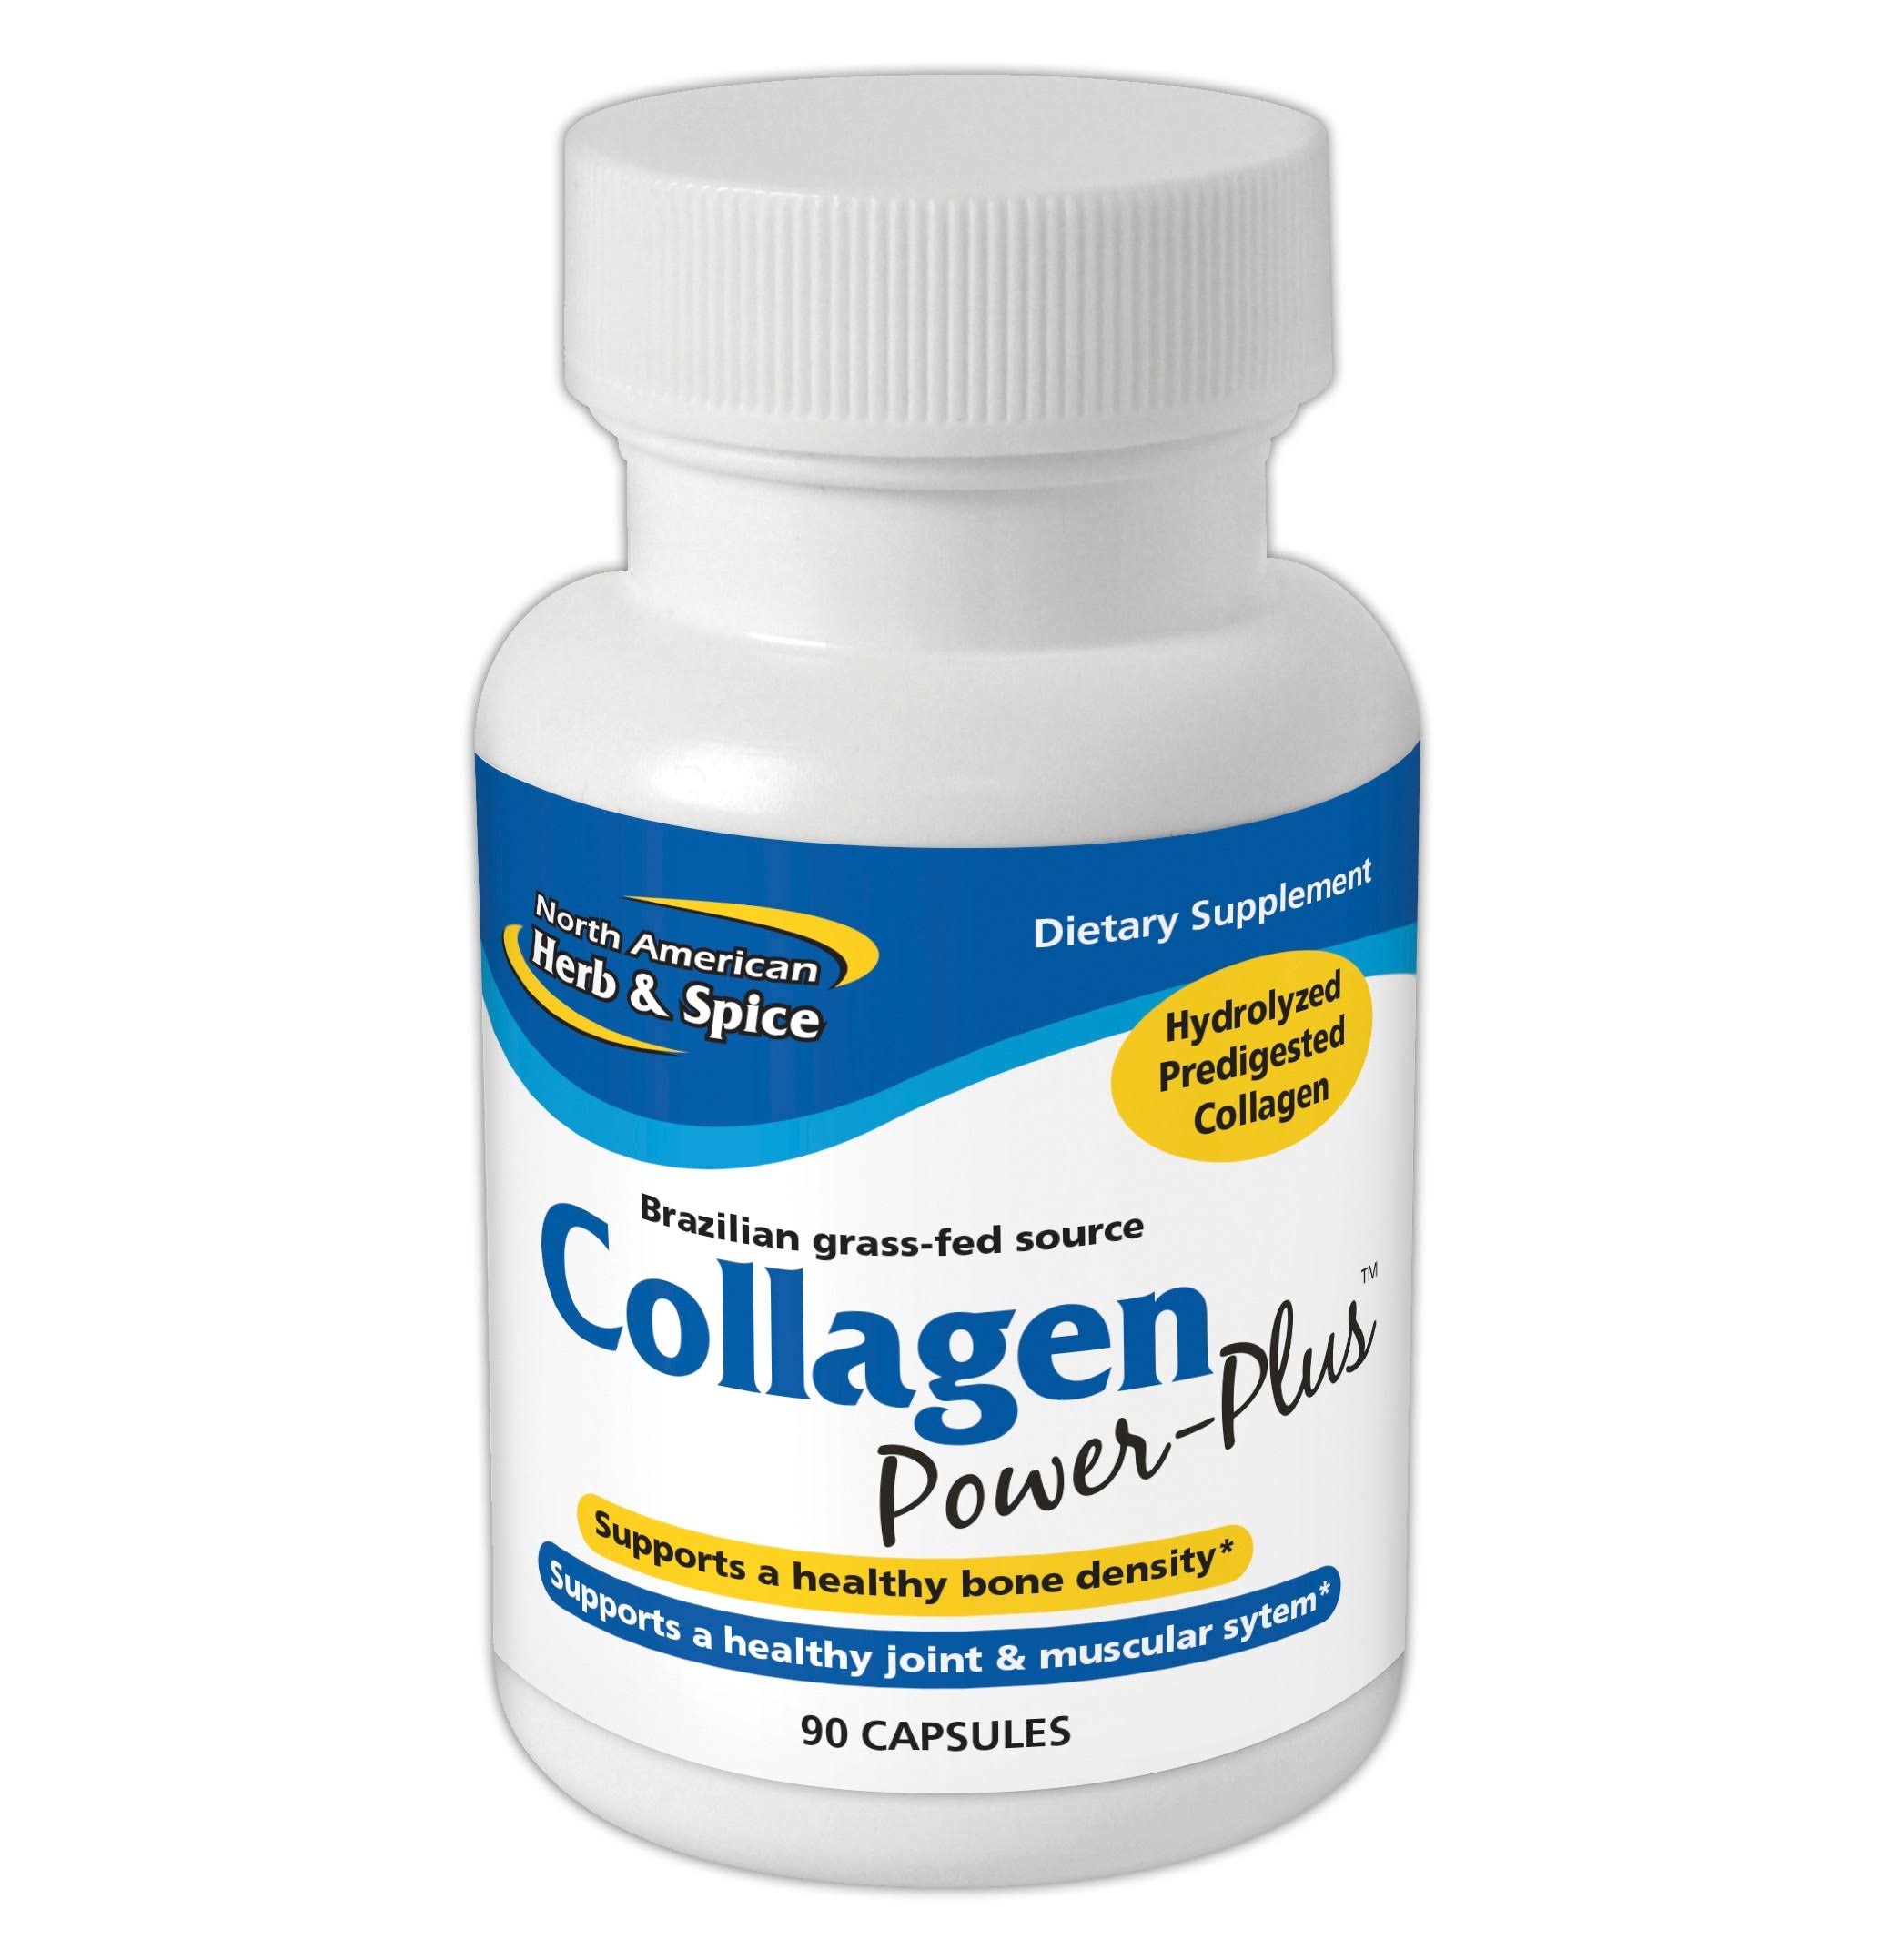 North American Herb & Spice Collagen Power Plus - 90 Capsules